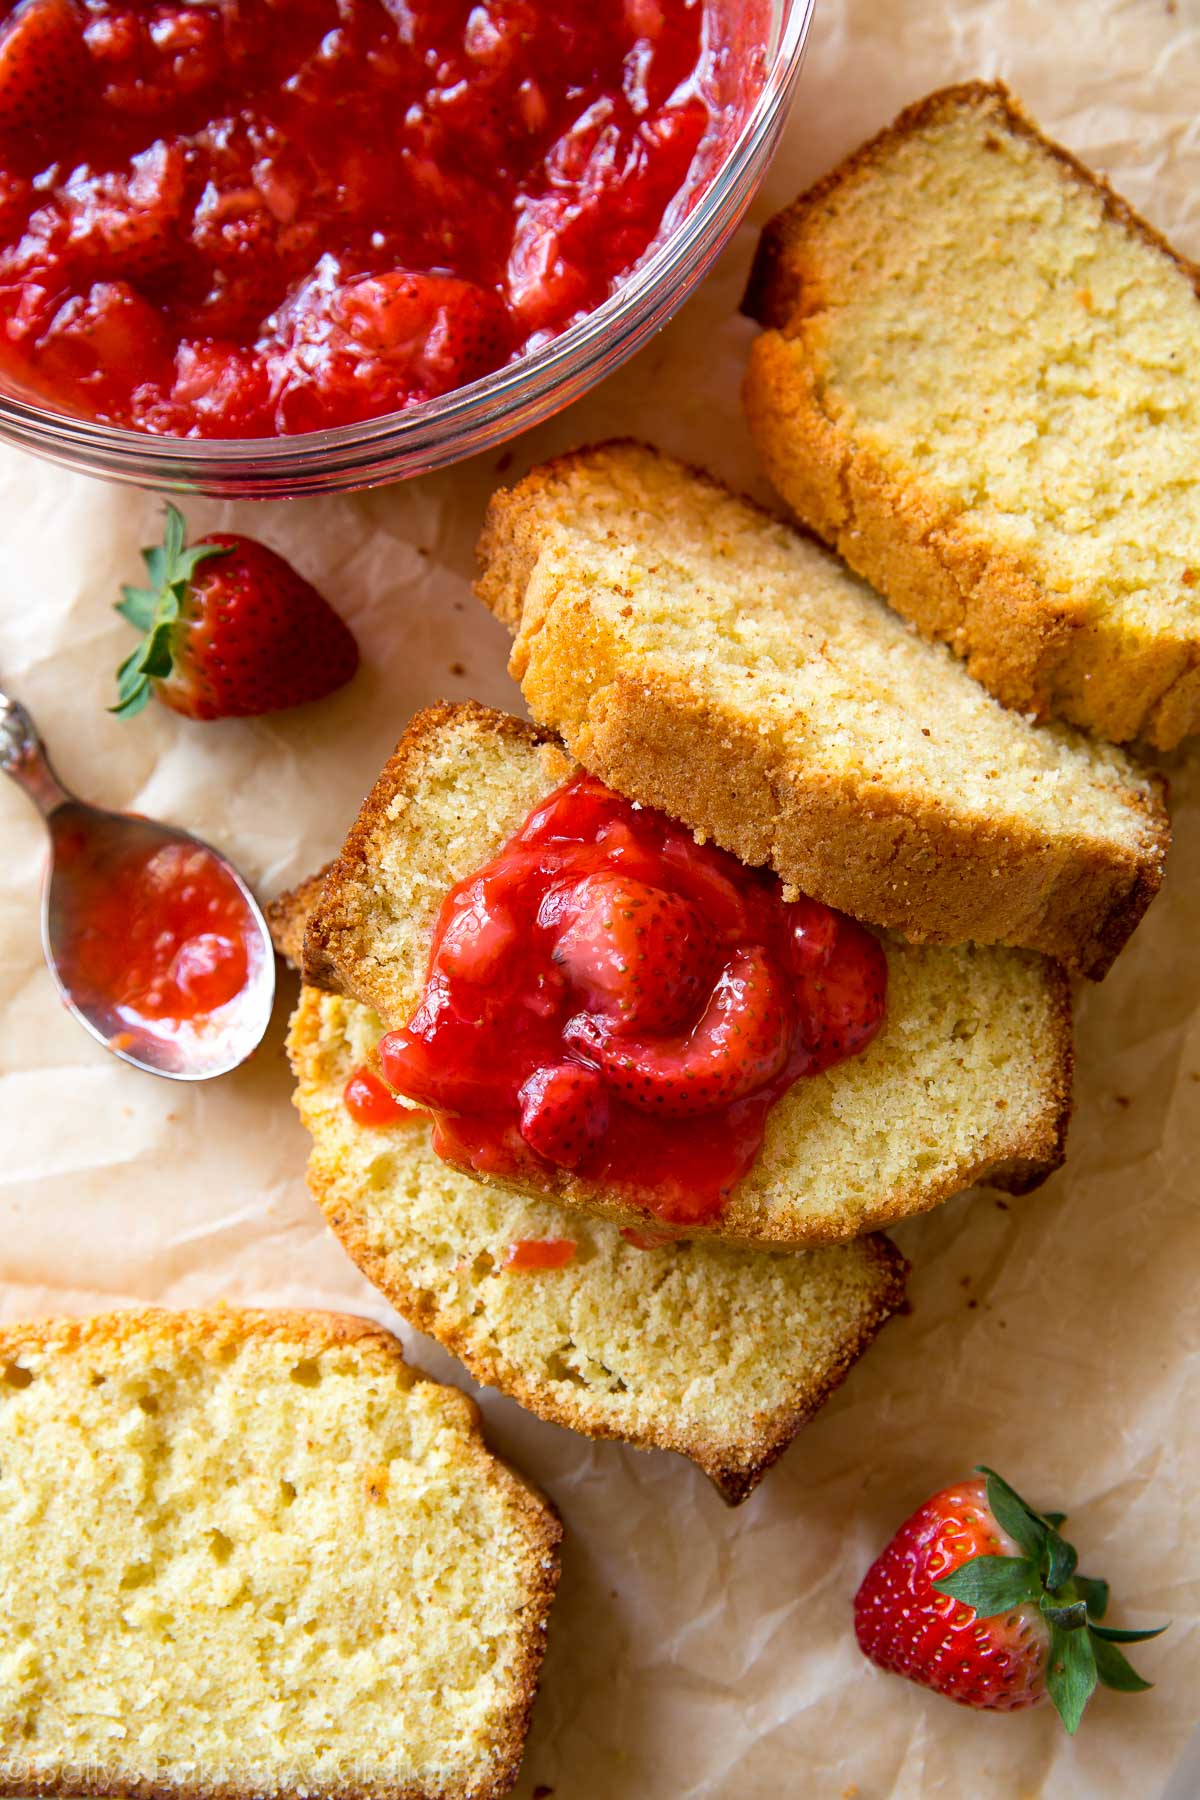 slices of pound cake with strawberry compote topping